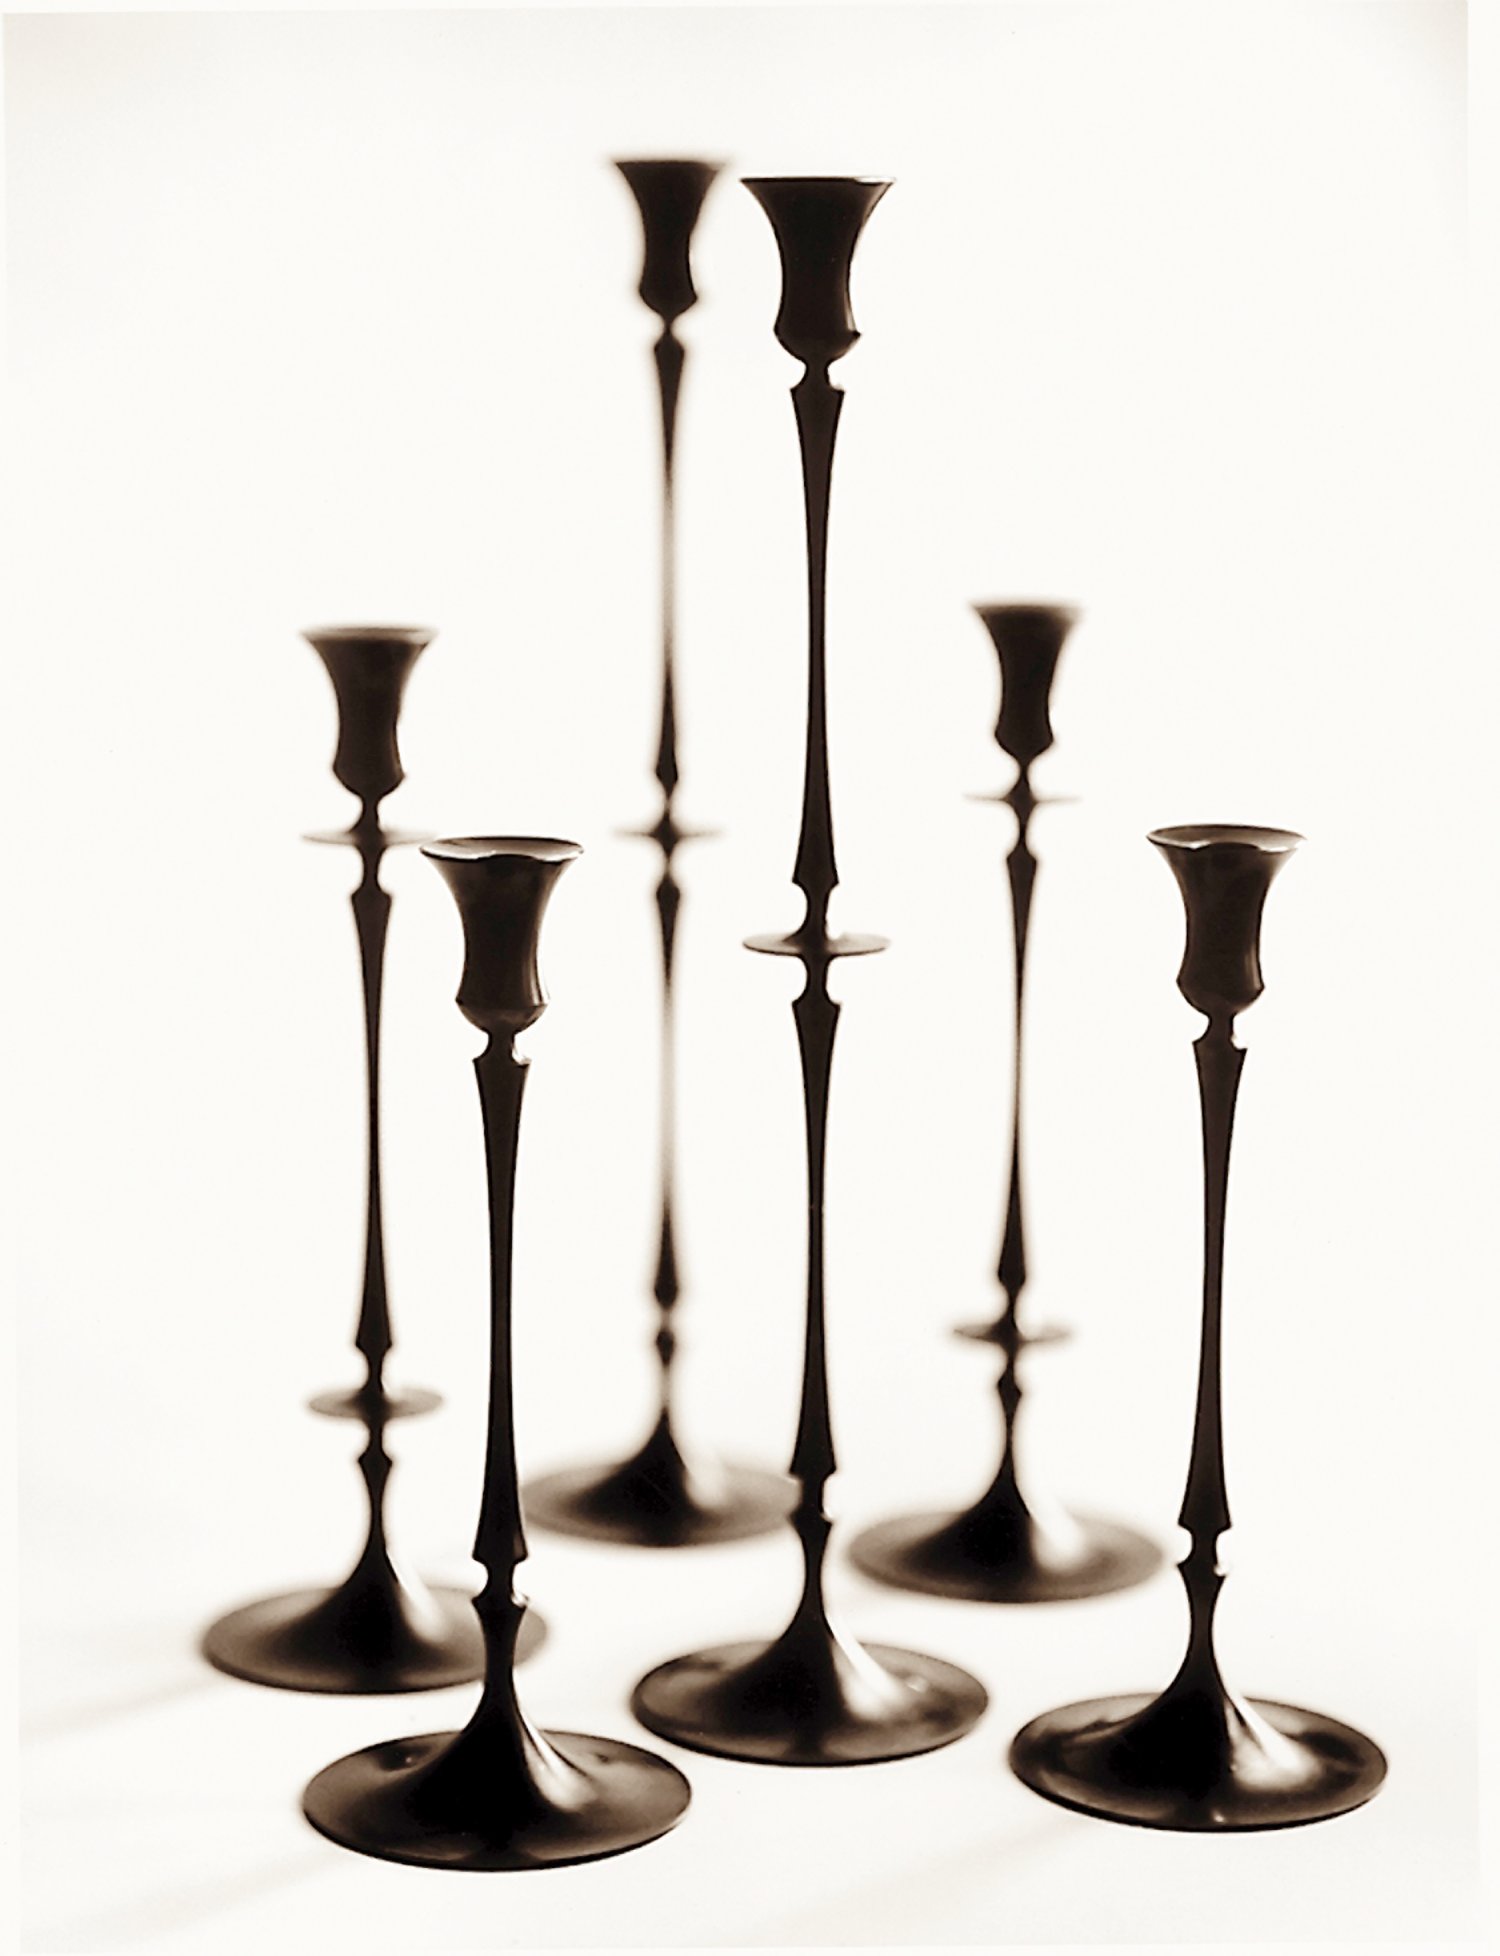 Butler Biedermeier — Oxidized Ted Candlesticks, by Muehling Bronze Swoon E.R.